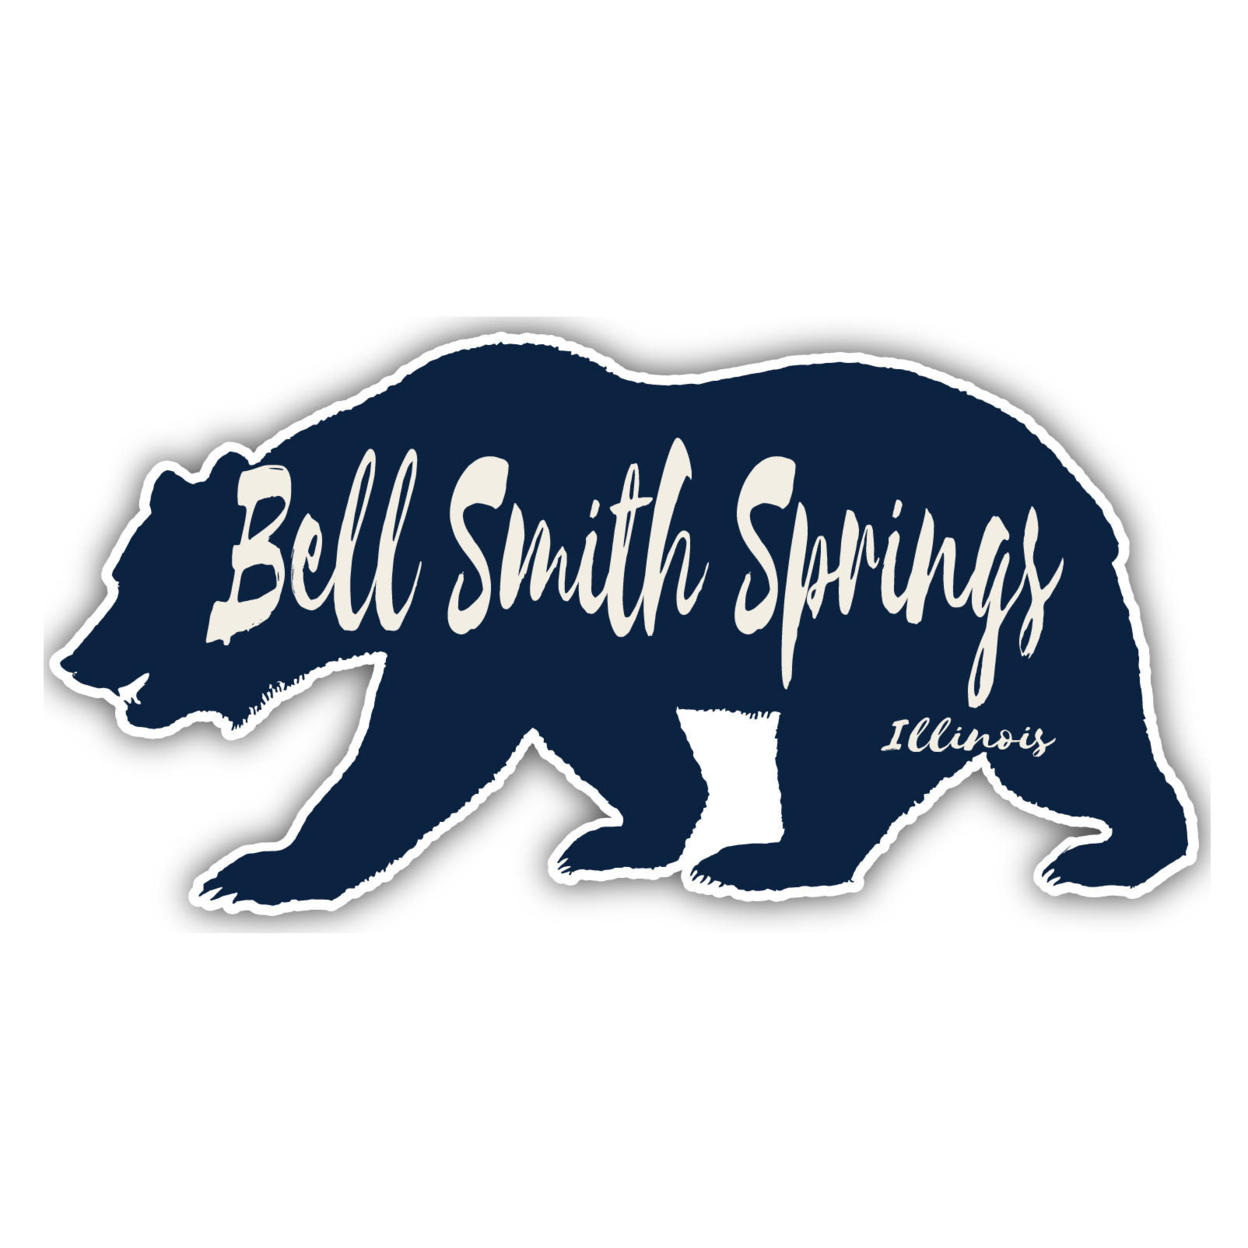 Bell Smith Springs Illinois Souvenir Decorative Stickers (Choose Theme And Size) - 4-Pack, 8-Inch, Camp Life